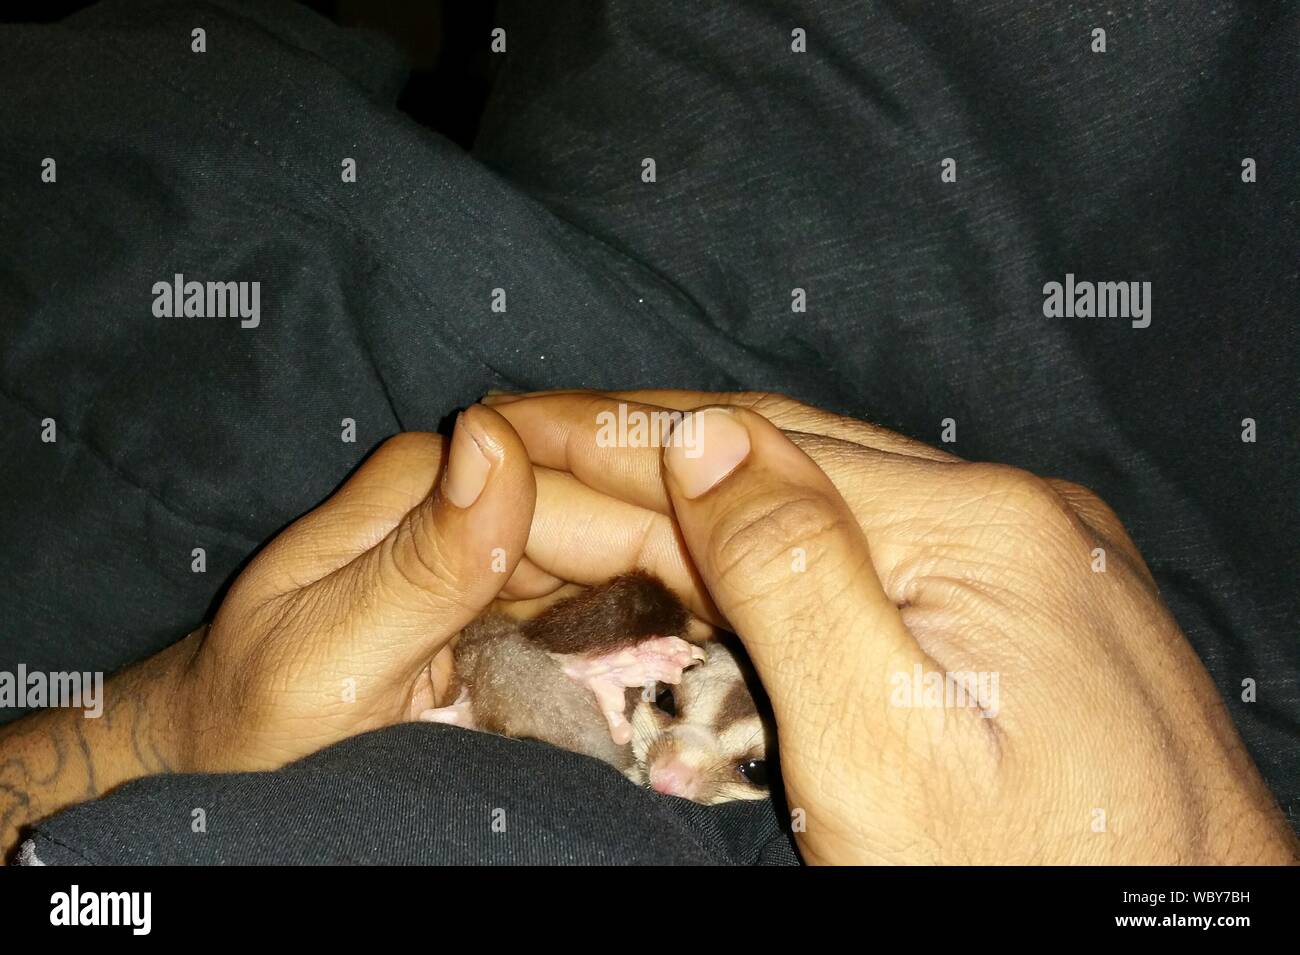 Close-up Of Hands Holding Baby Animal Stock Photo